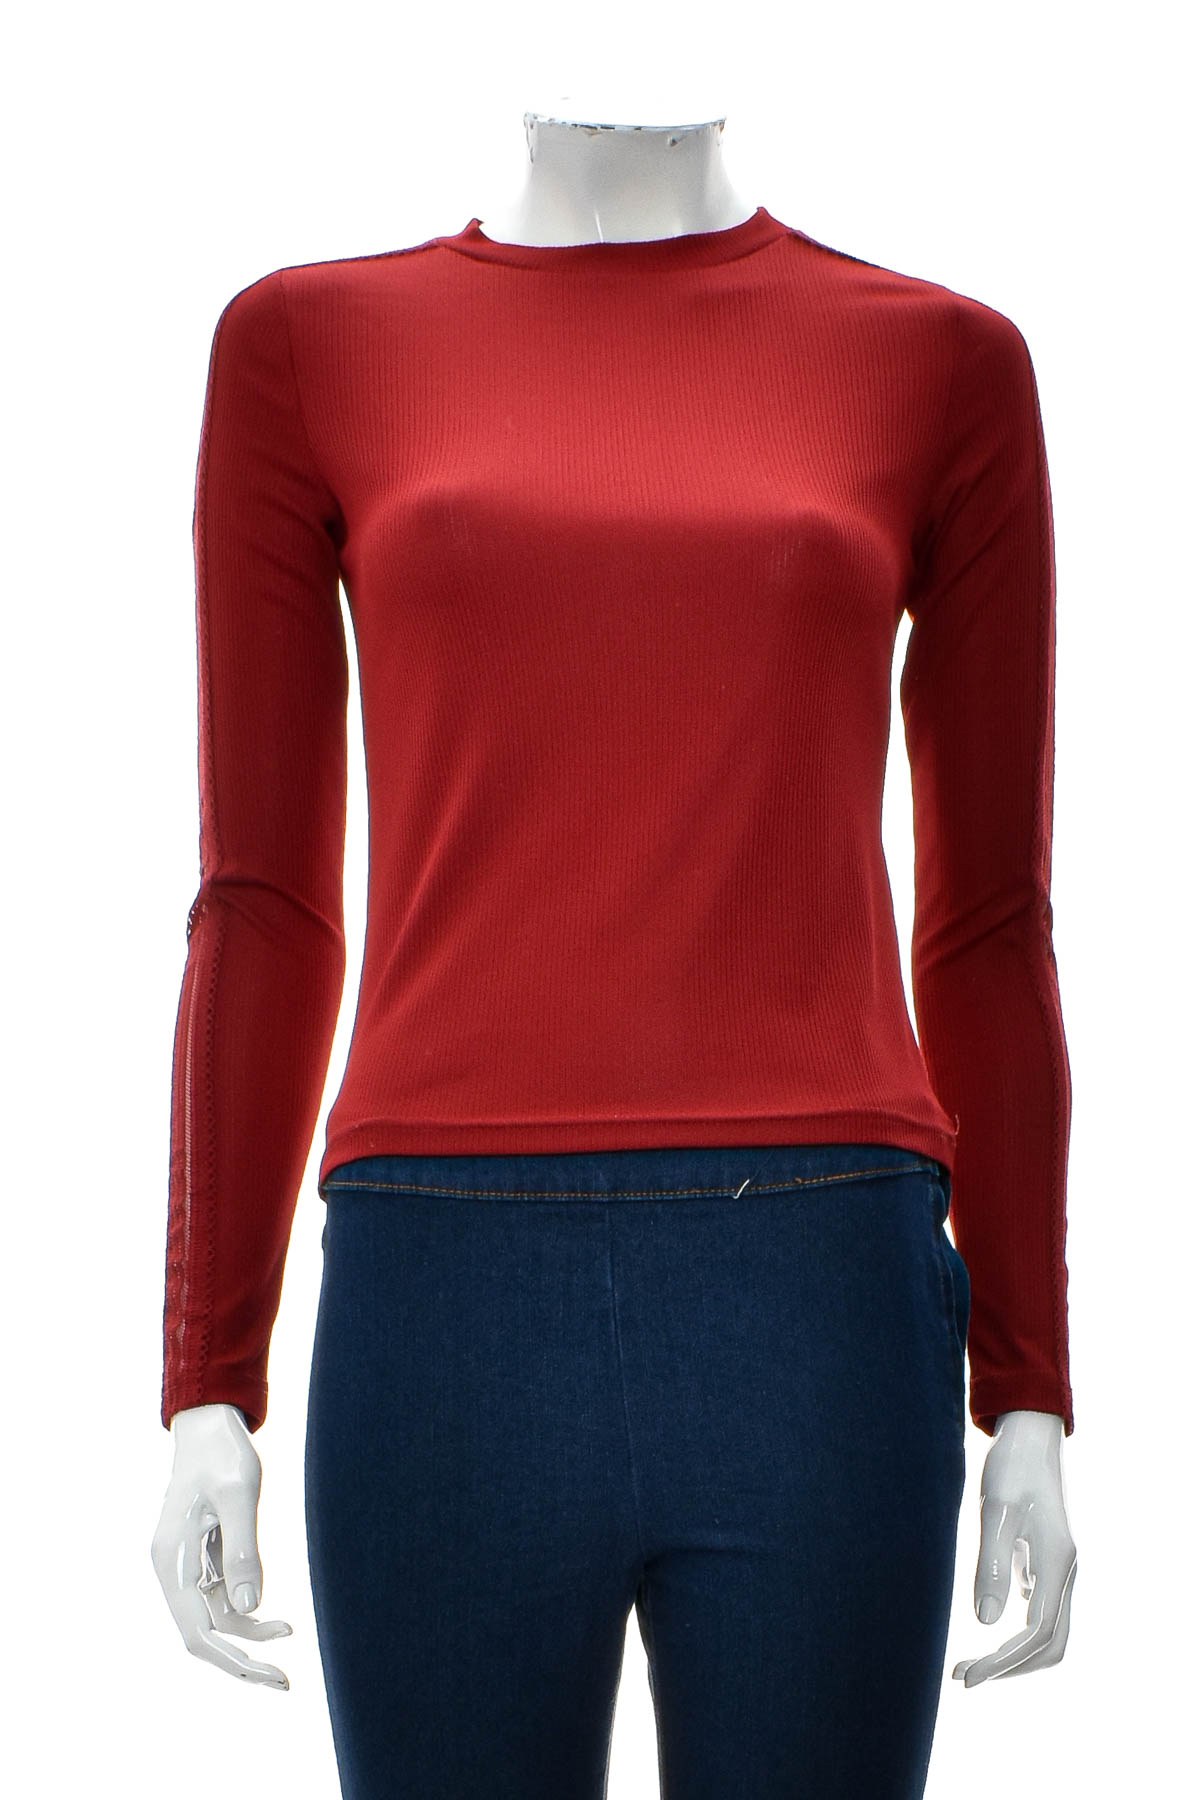 Women's sweater - ONLY - 0